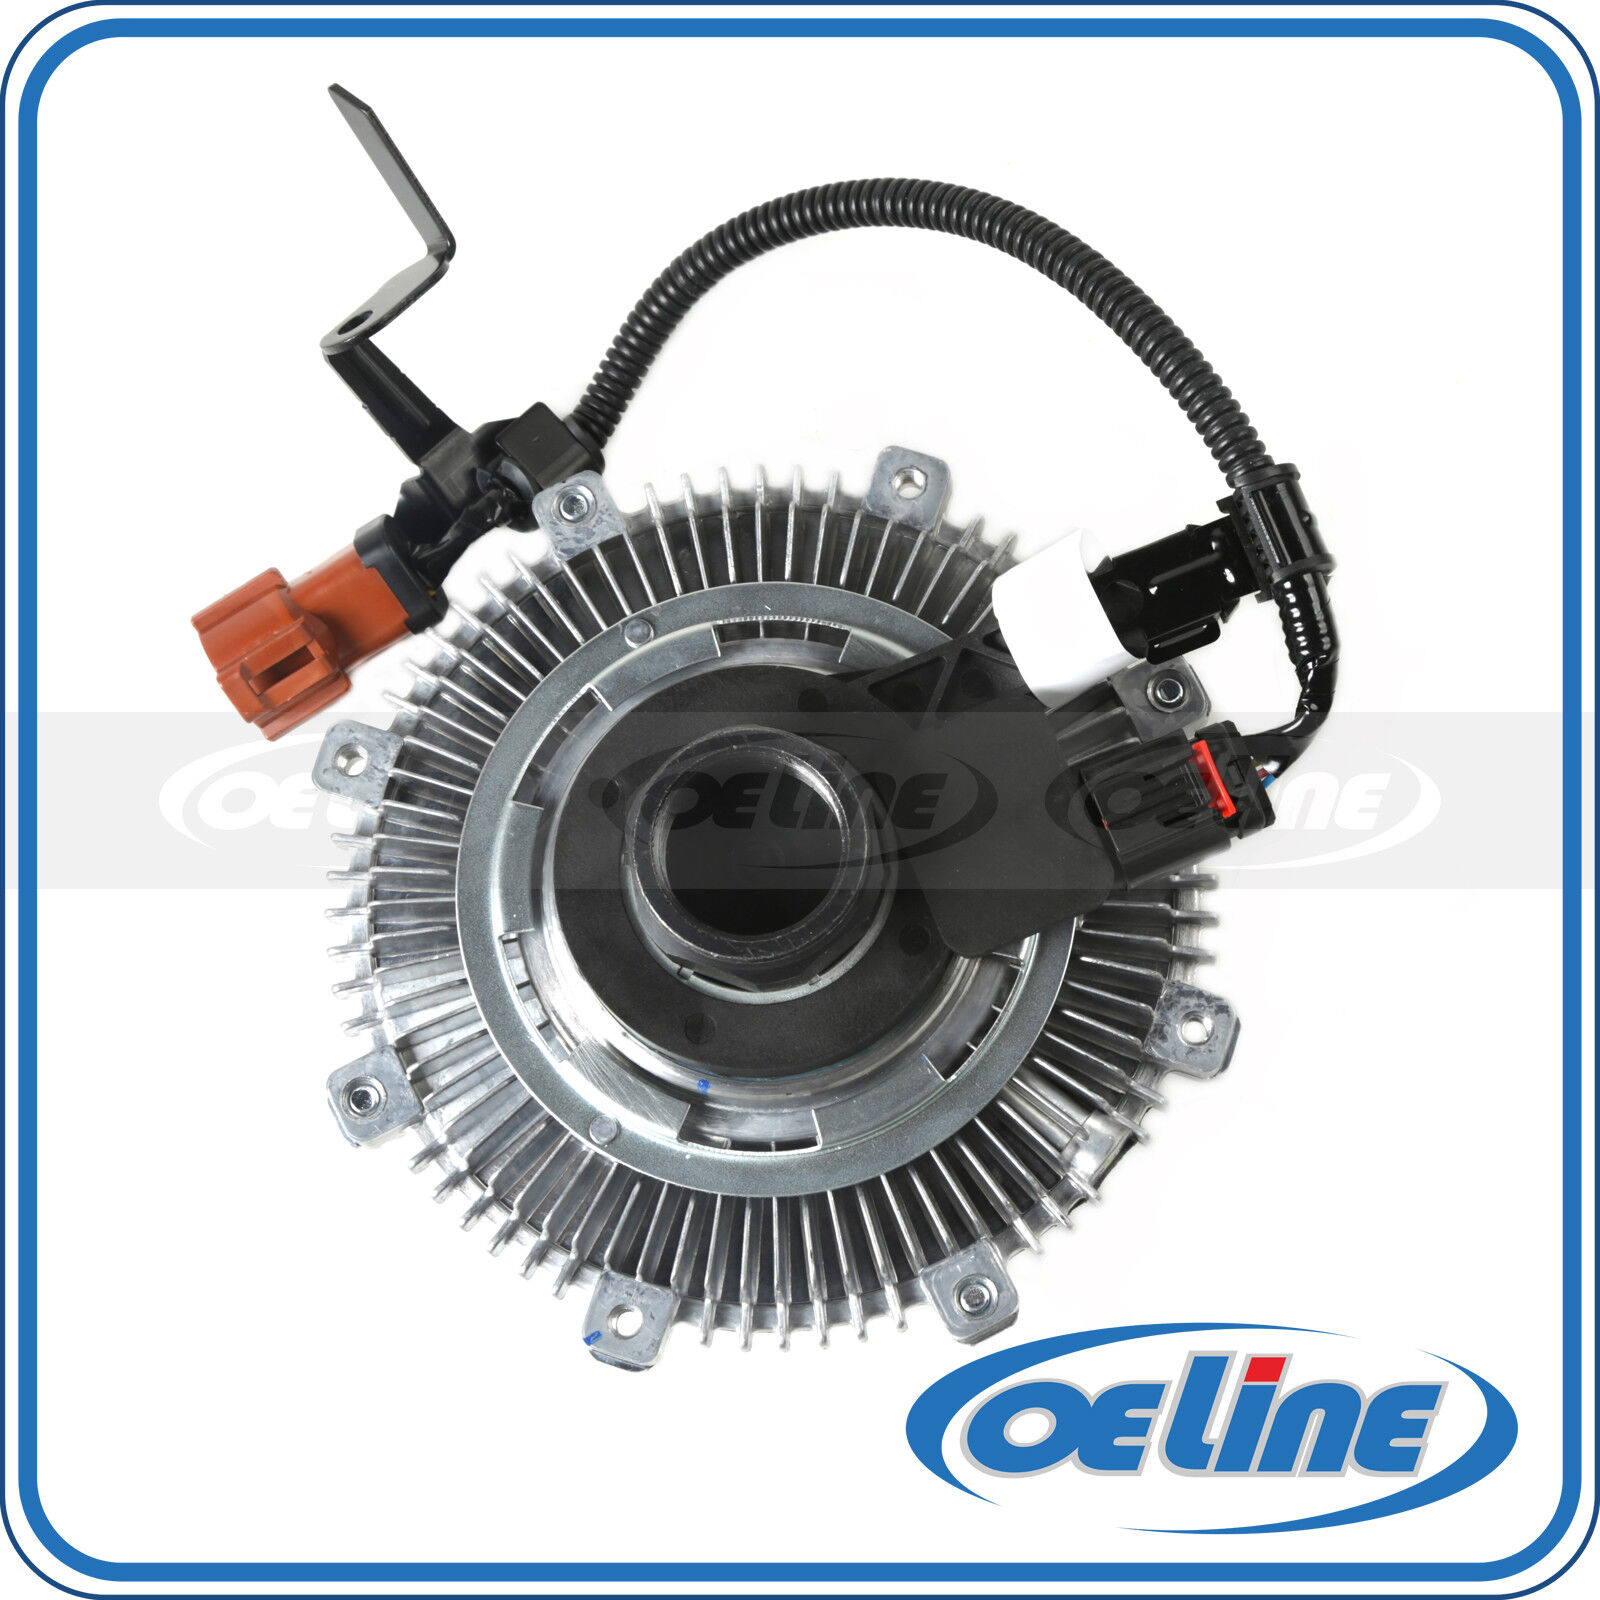 Cooling Fan Clutch for 2007-2008 Ford F150 F250 Expedition Lincoln 4.6L 5.4L V8